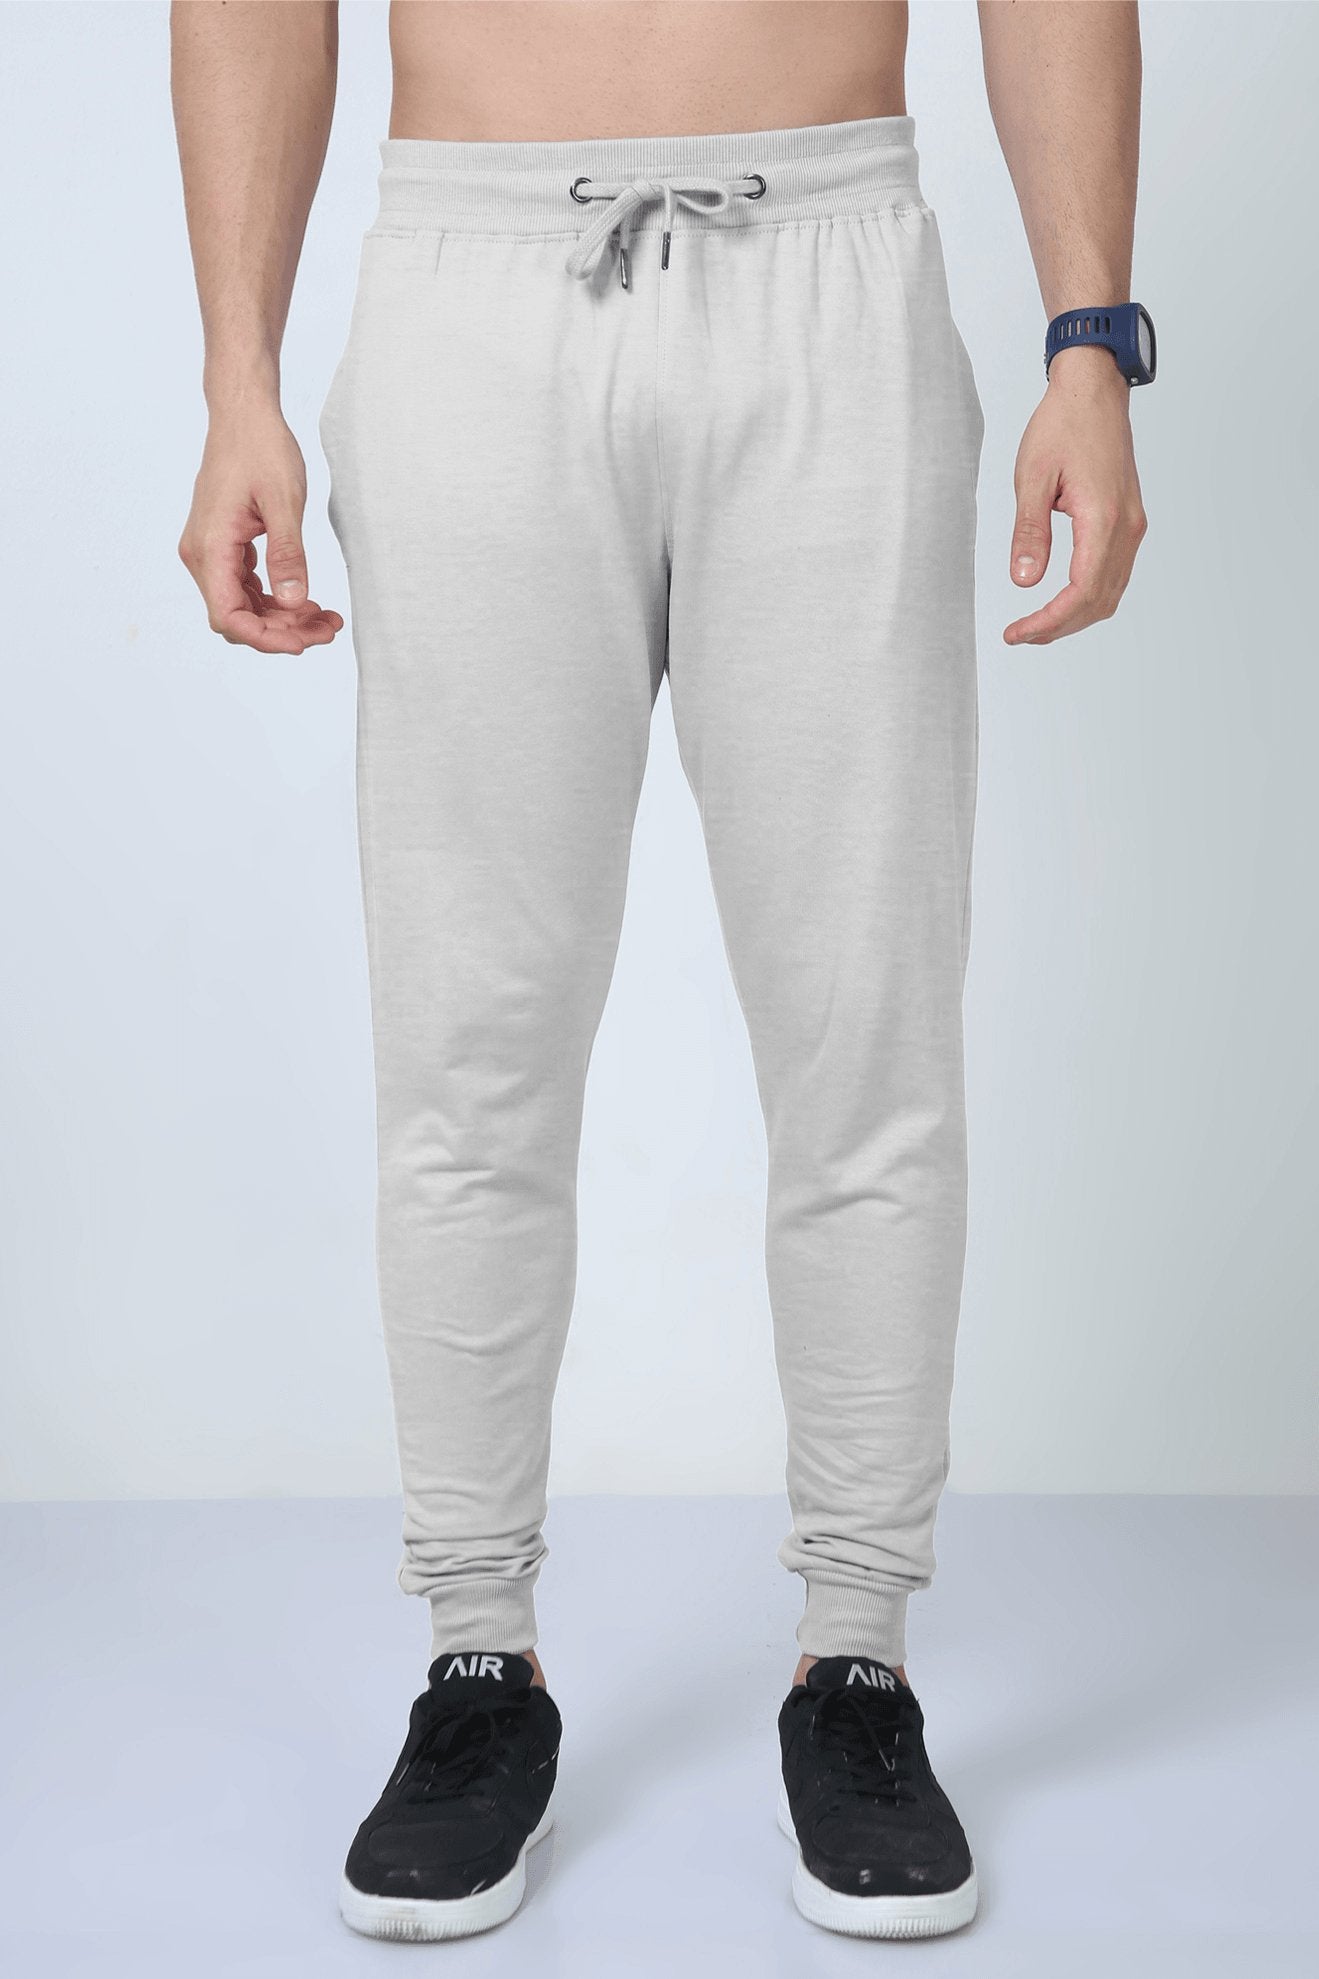 Unisex Joggers - The Vybe Store